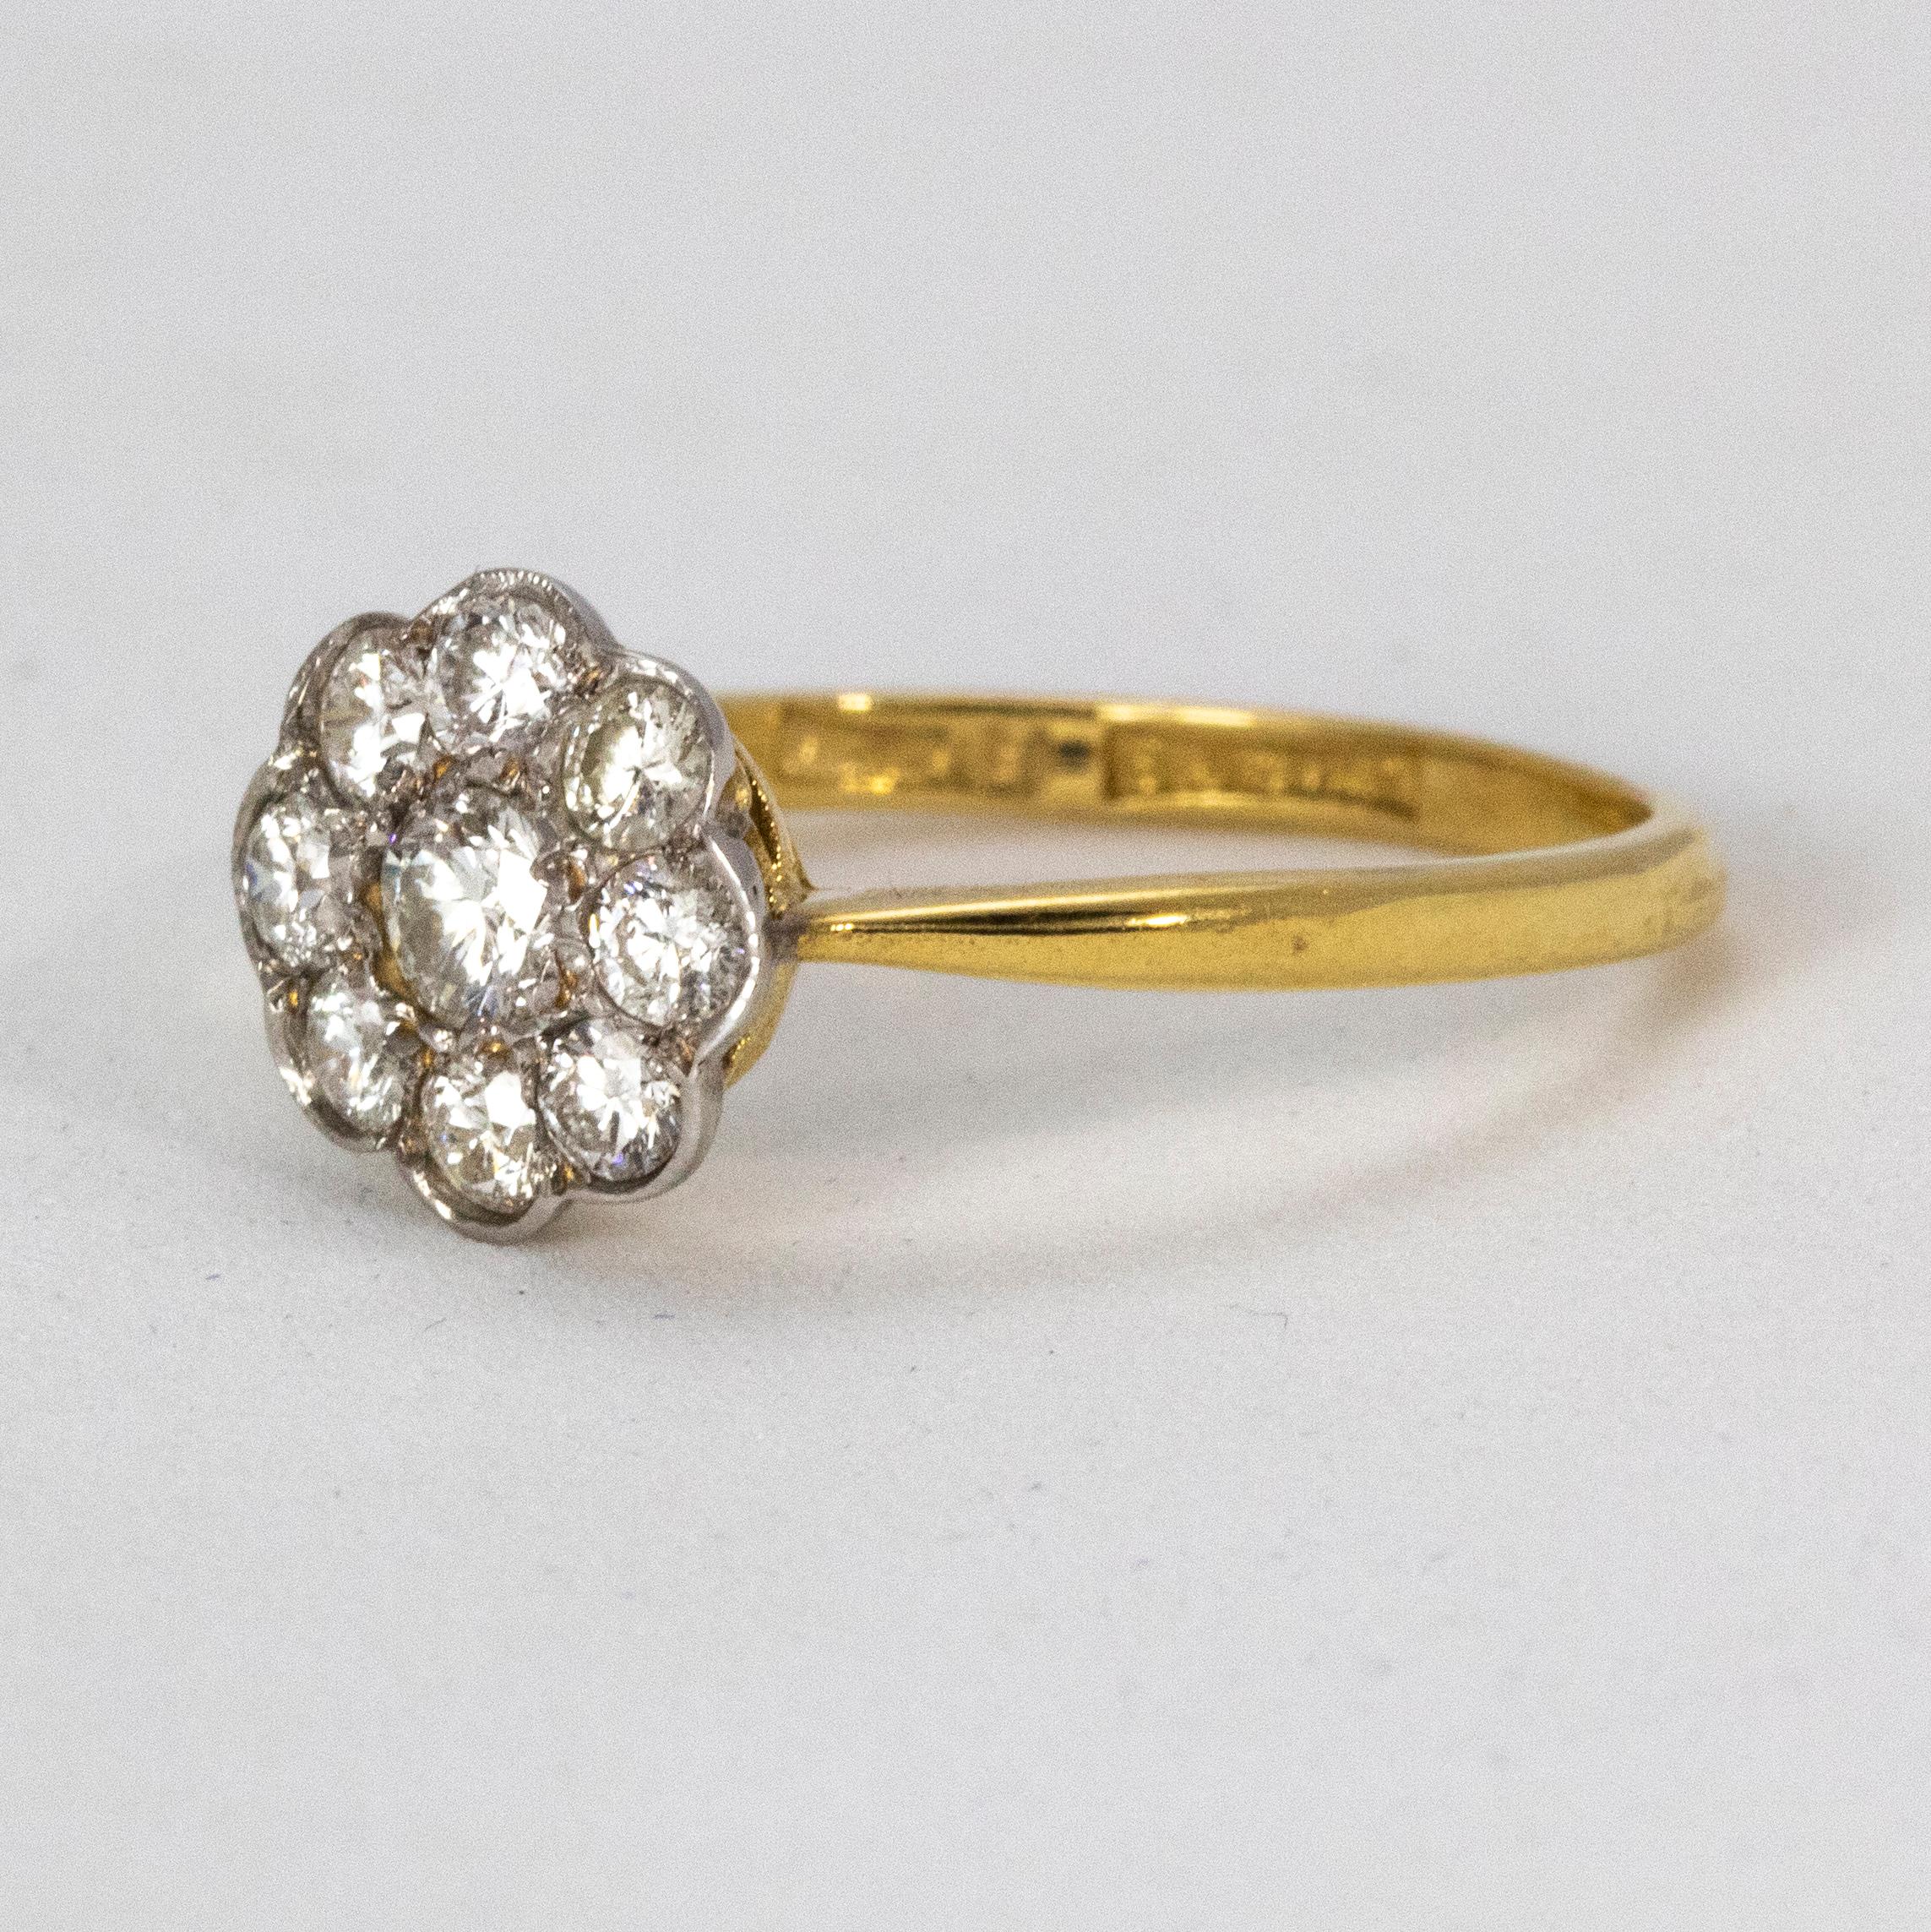 An Exquisite Diamond Daisy Cluster Ring in 18 Karat Yellow Gold. This ring was crafted in the Edwardian era circa 1915. Centrally set in this beautiful ring is a 0.25ct old European cut diamond, colour H and clarity SI 2, surrounded by a further